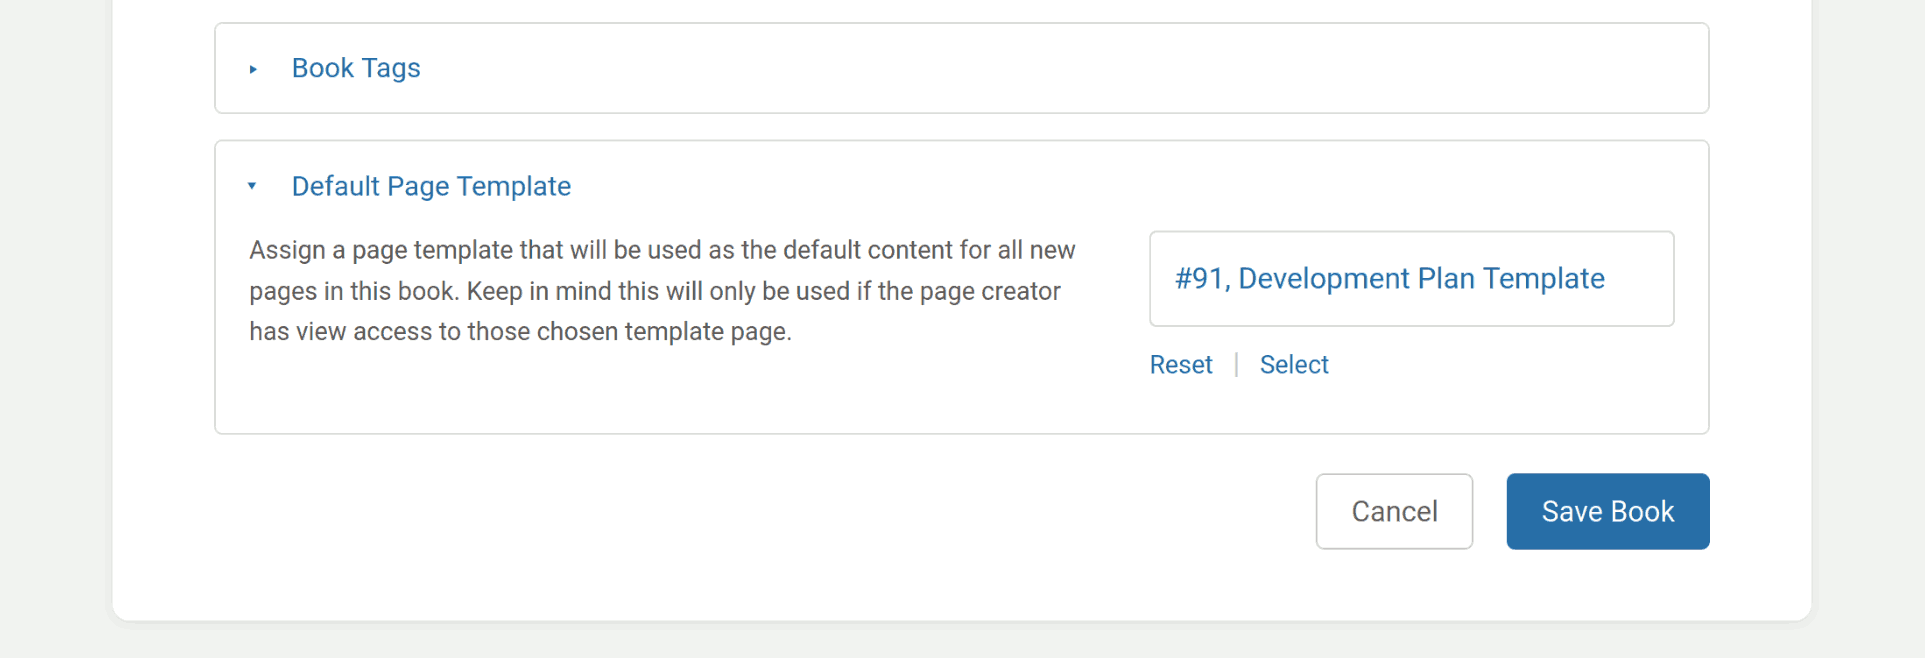 A view of the form for editing a Book, focused on a &ldquo;Default Page Template&rdquo; section with a &ldquo;Development Plan Template&rdquo; item selected